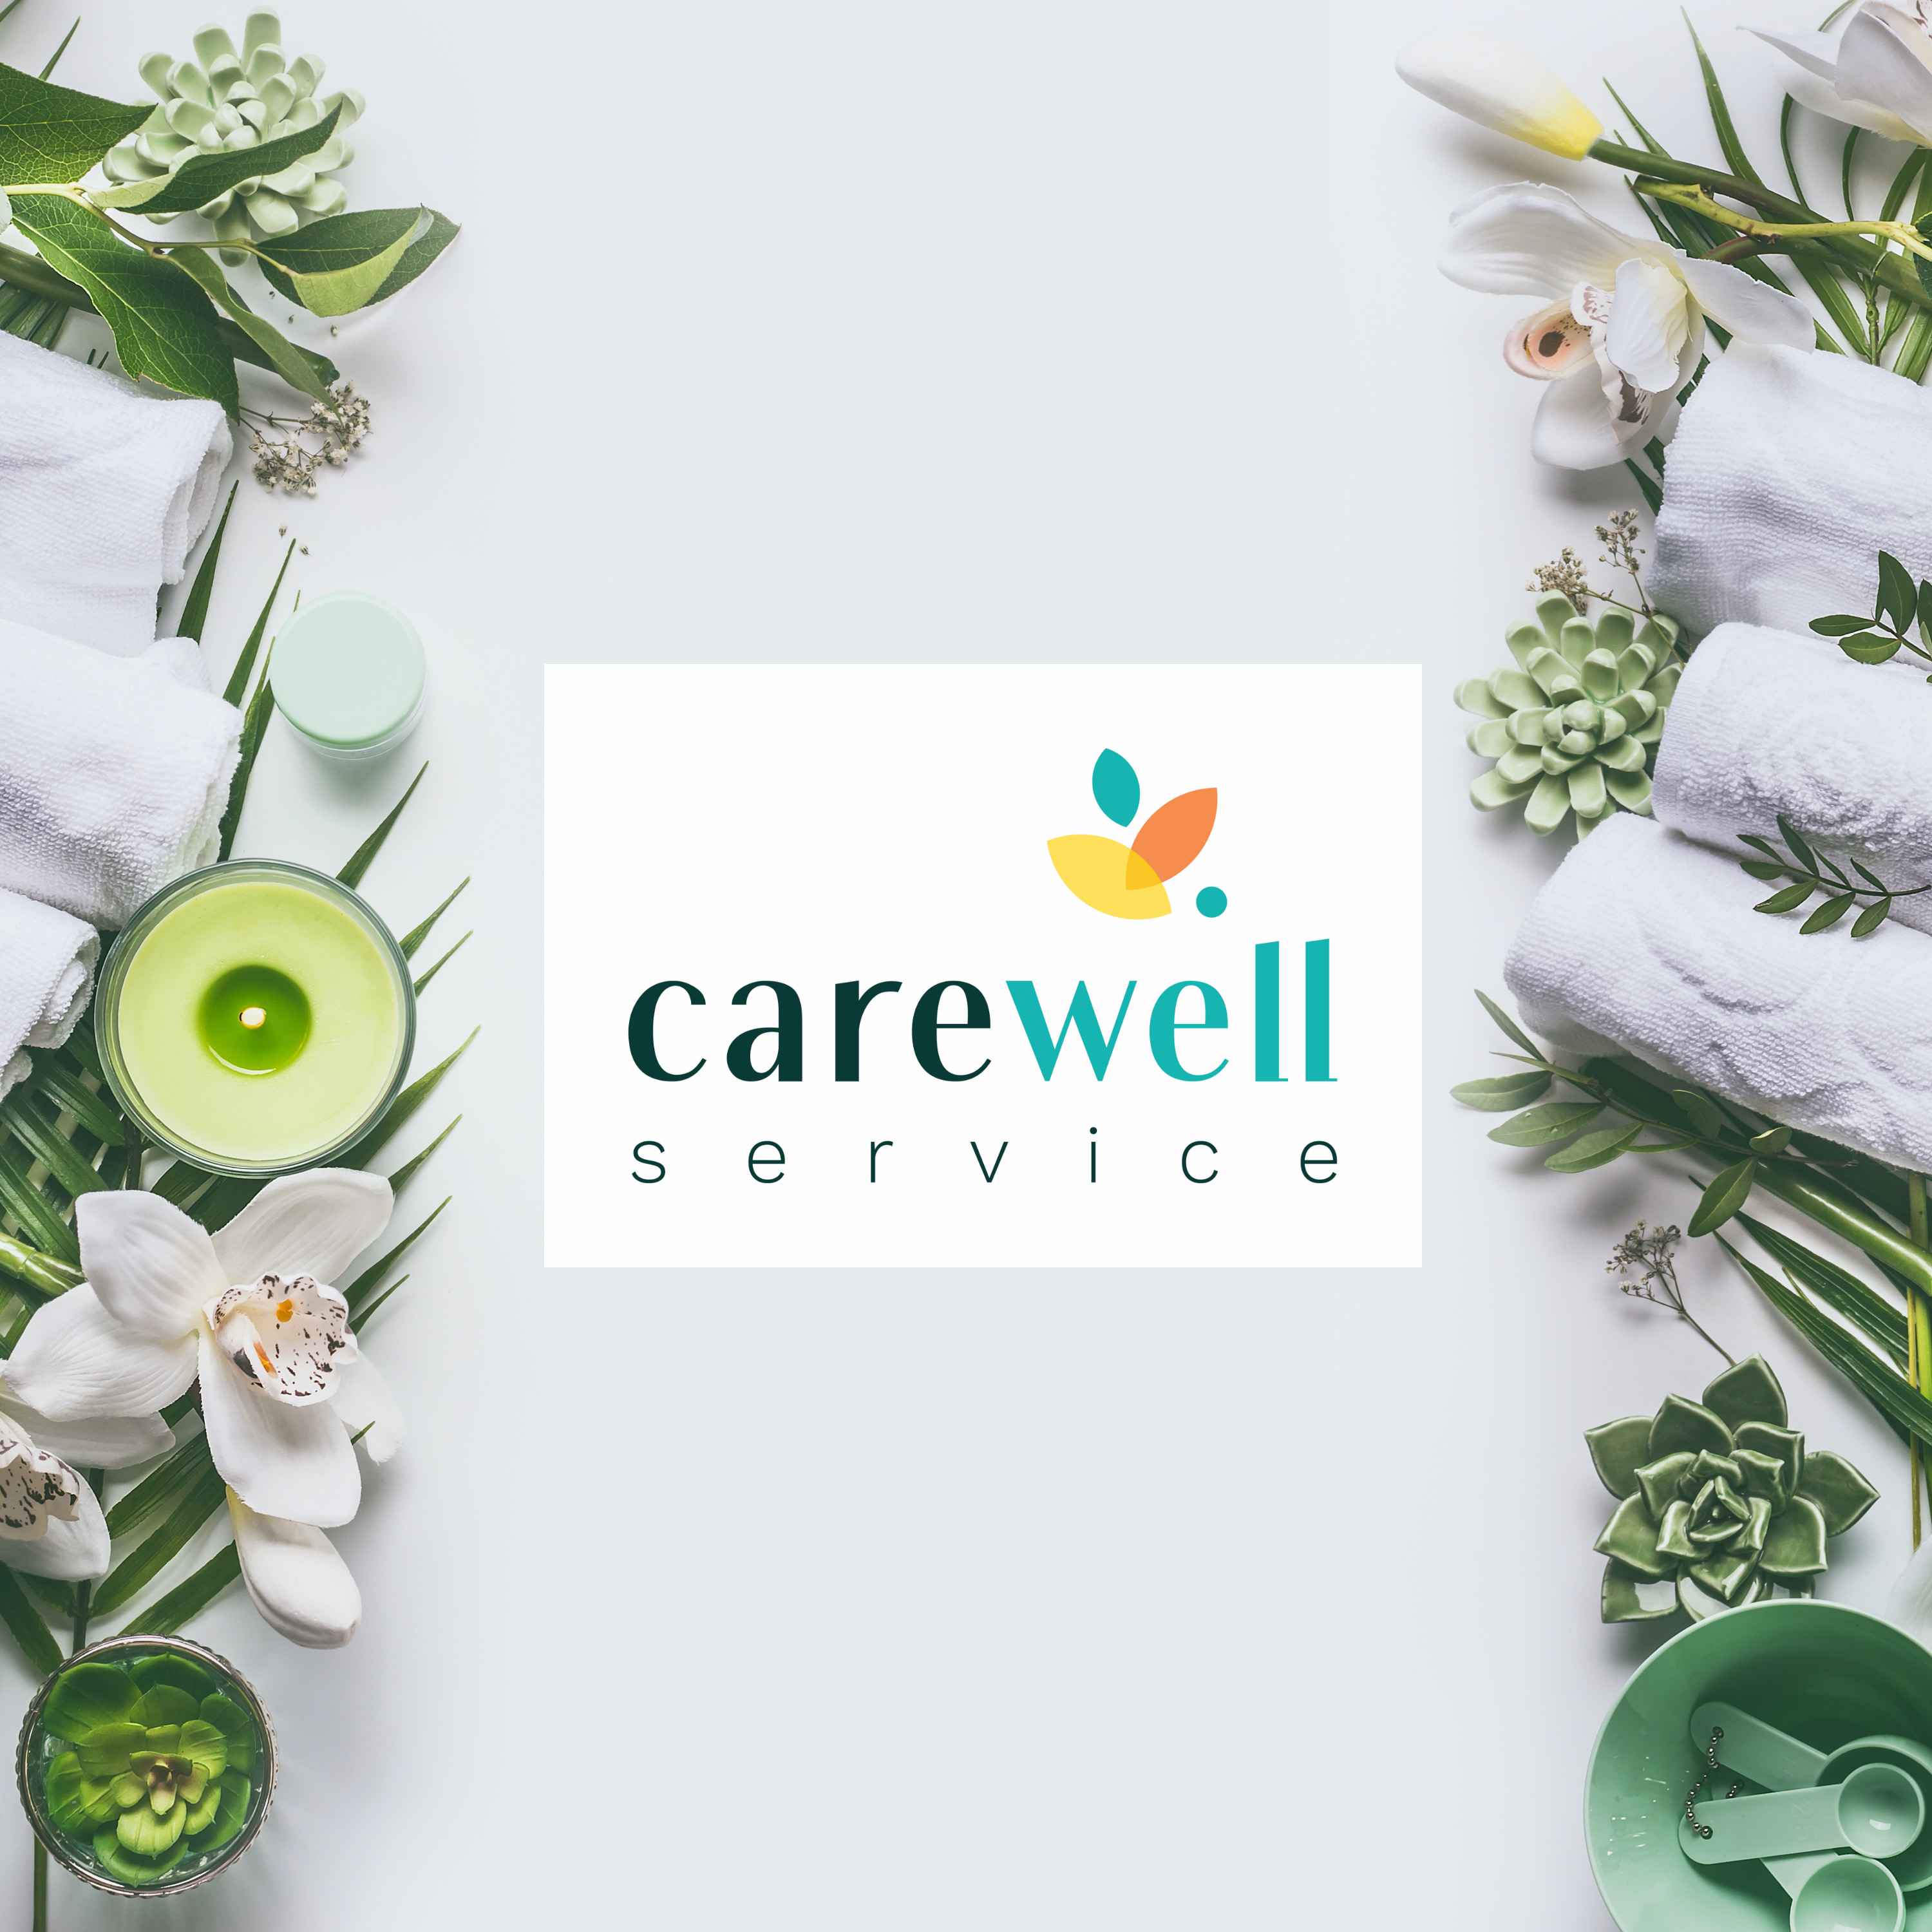 Carewell Massage and spa